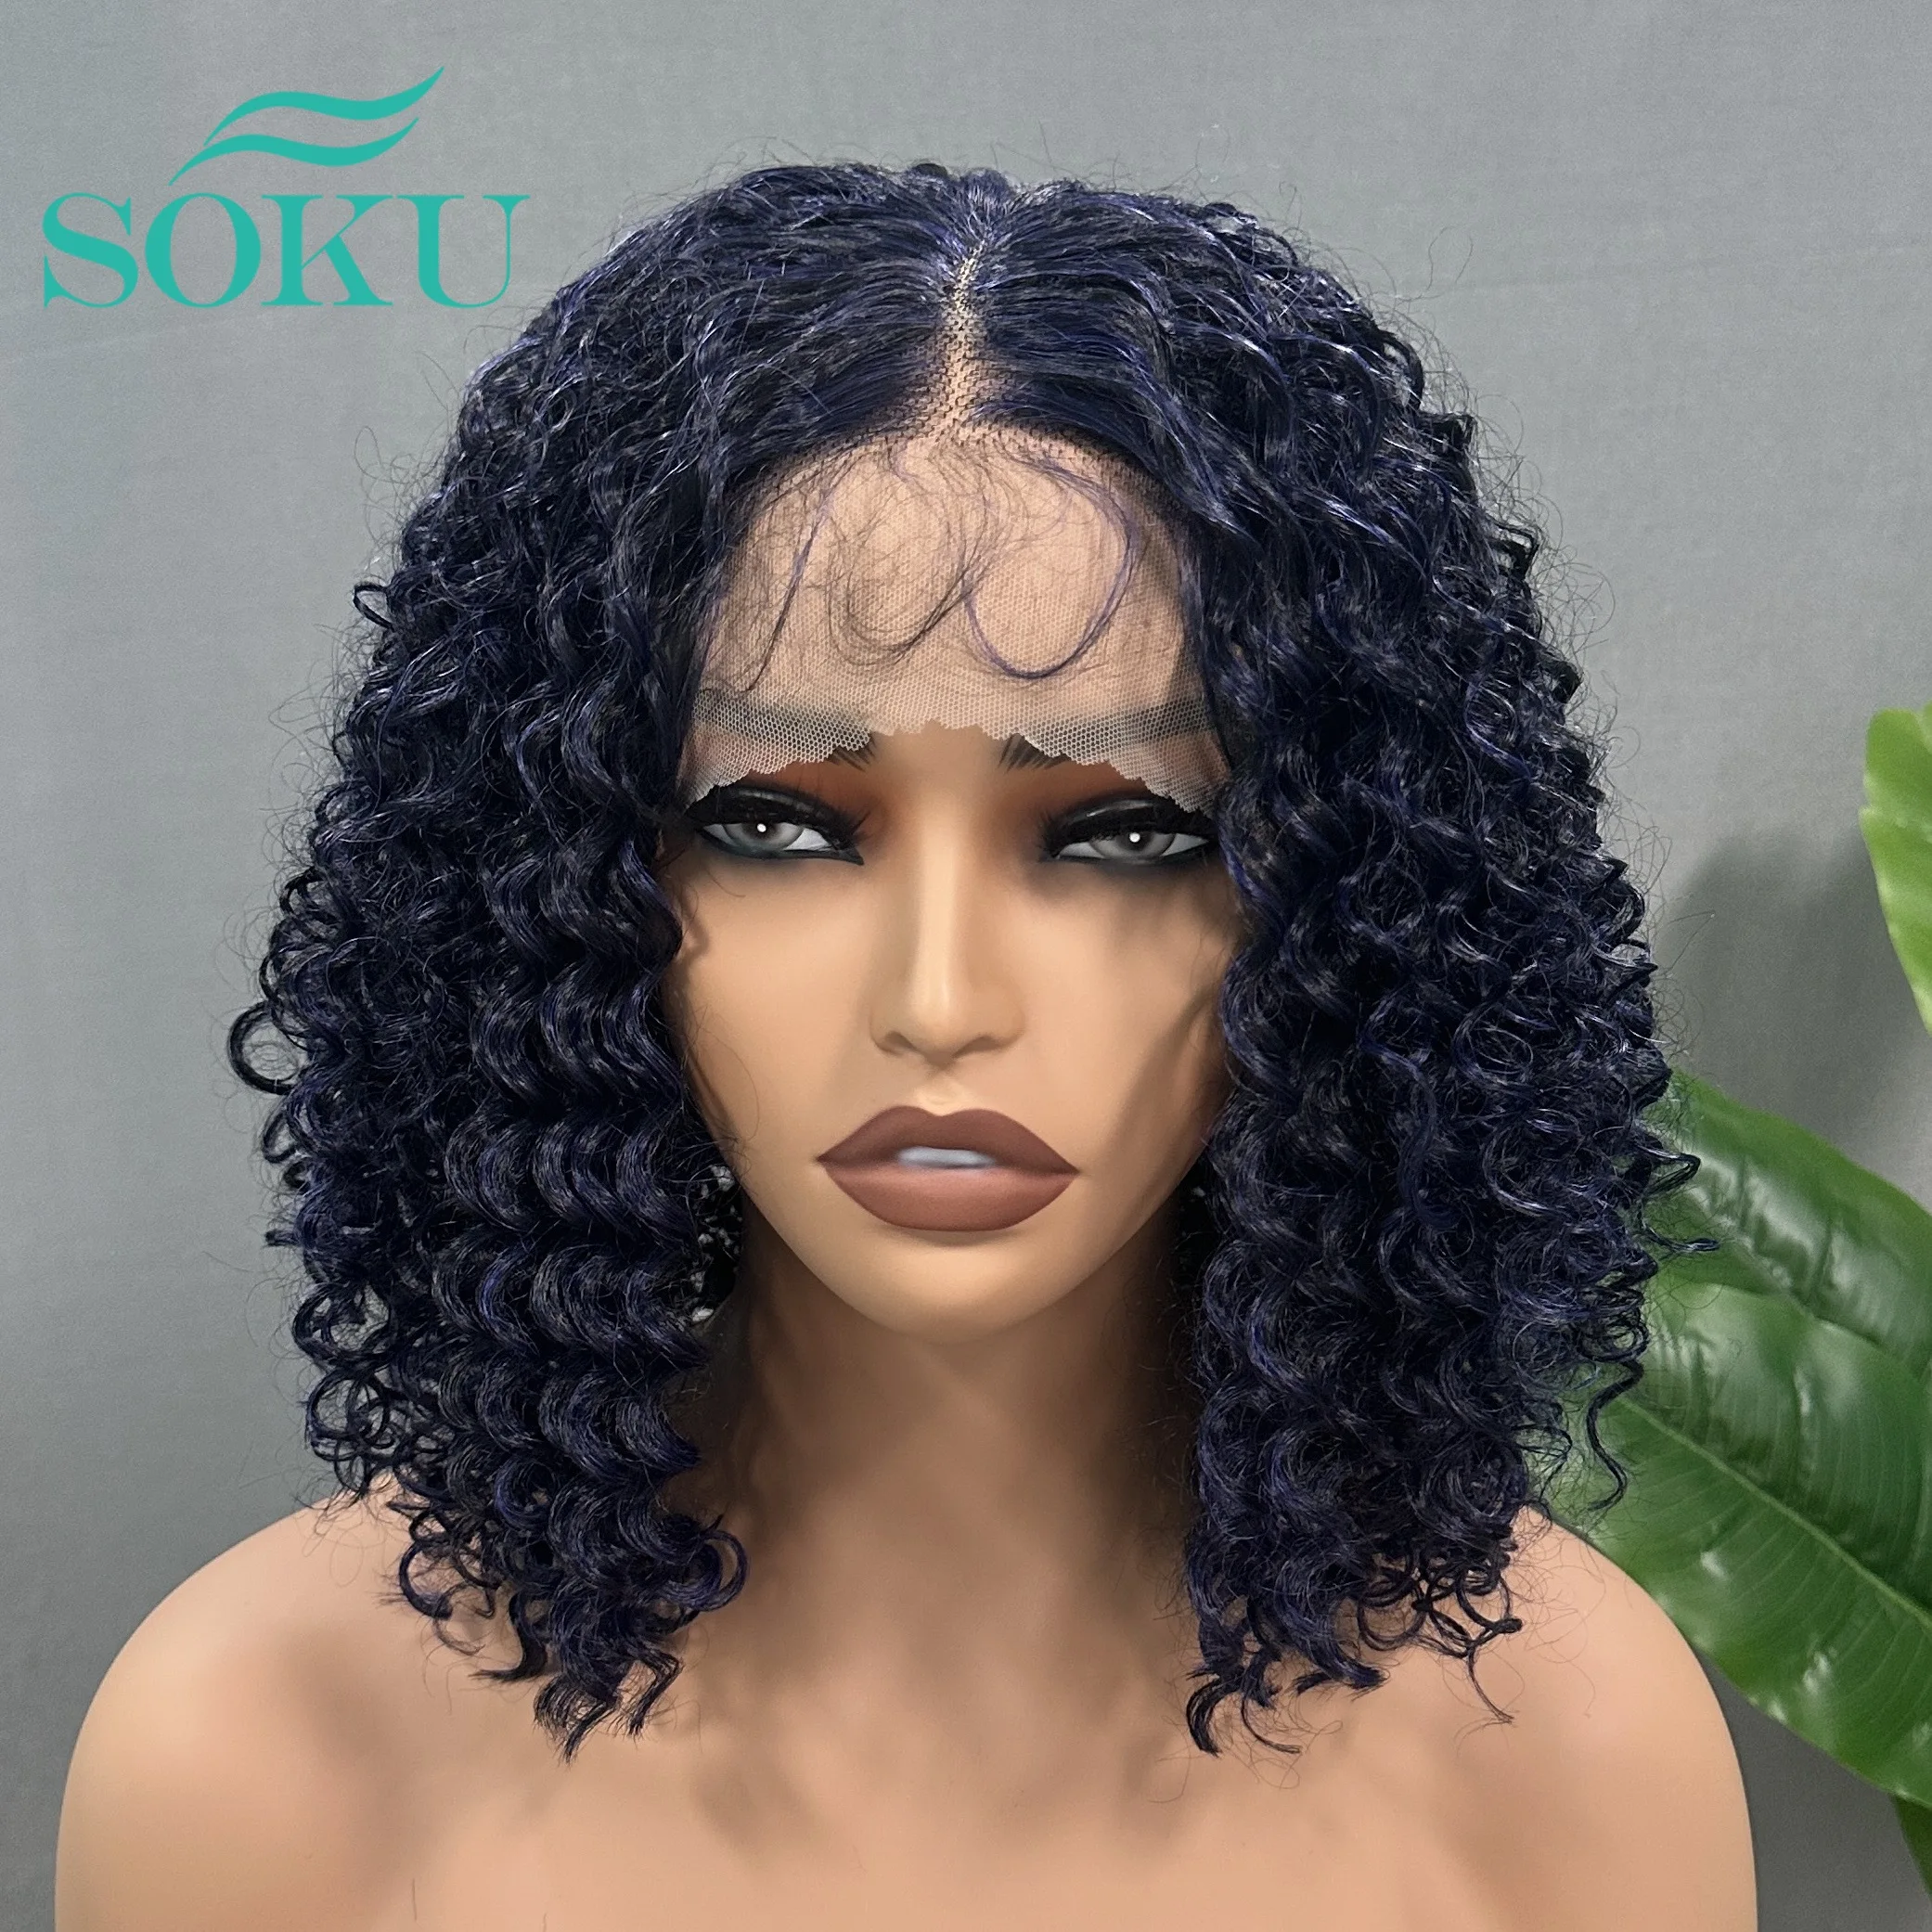 

SOKU Middle Part Lace Front Wigs 130% Density Dark Blue Short Curly Bob Wig Natural Synthetic Wig for Women Heat Resistant